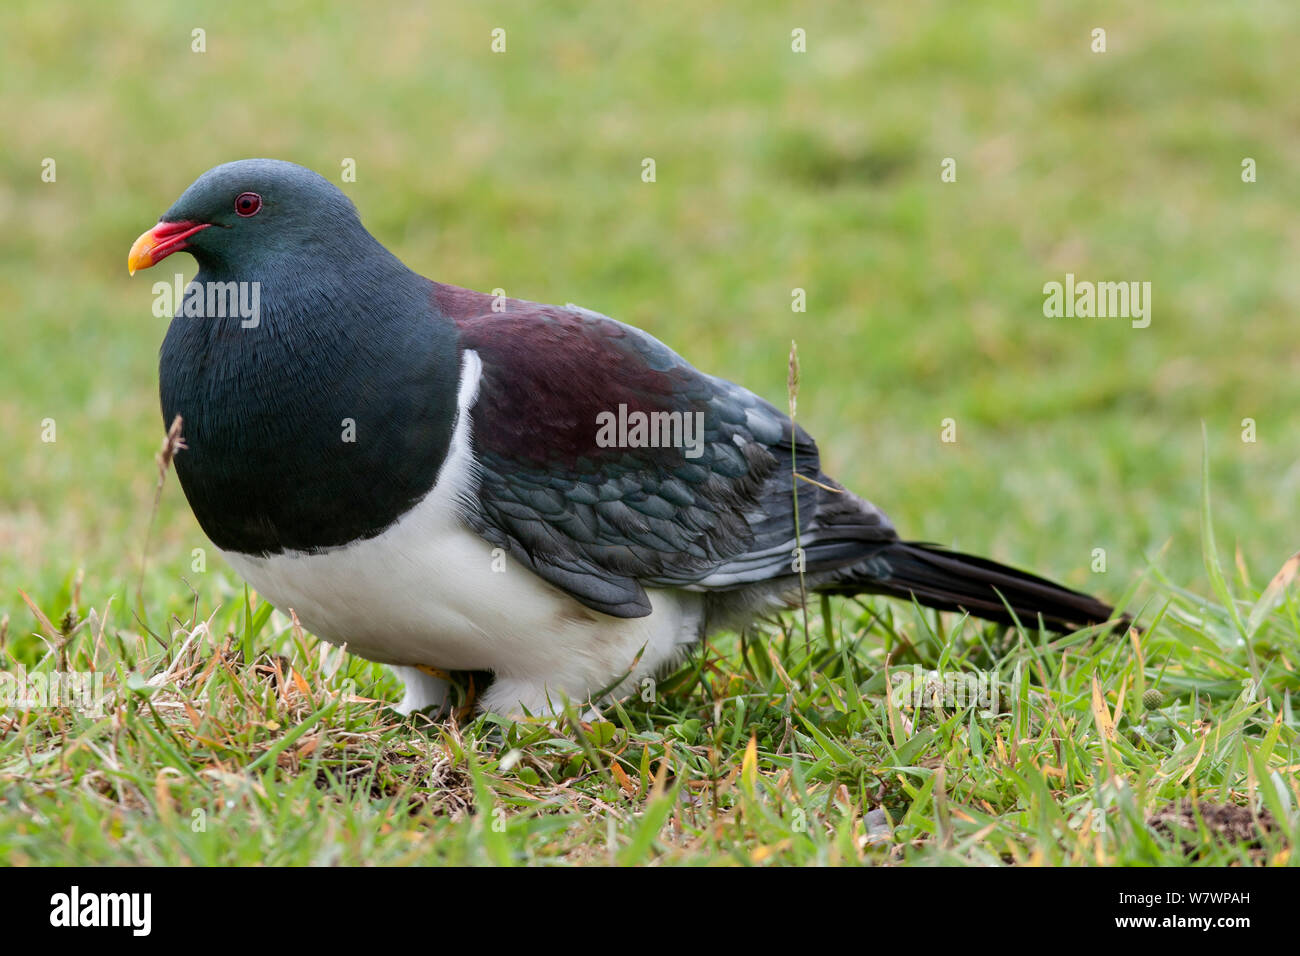 Adult Chatham Island pigeon (Hemiphaga chathamensis) feeding on clover and grasses on the ground. Tuku Valley, Chatham Island, New Zealand, November. Vulnerable species. Stock Photo